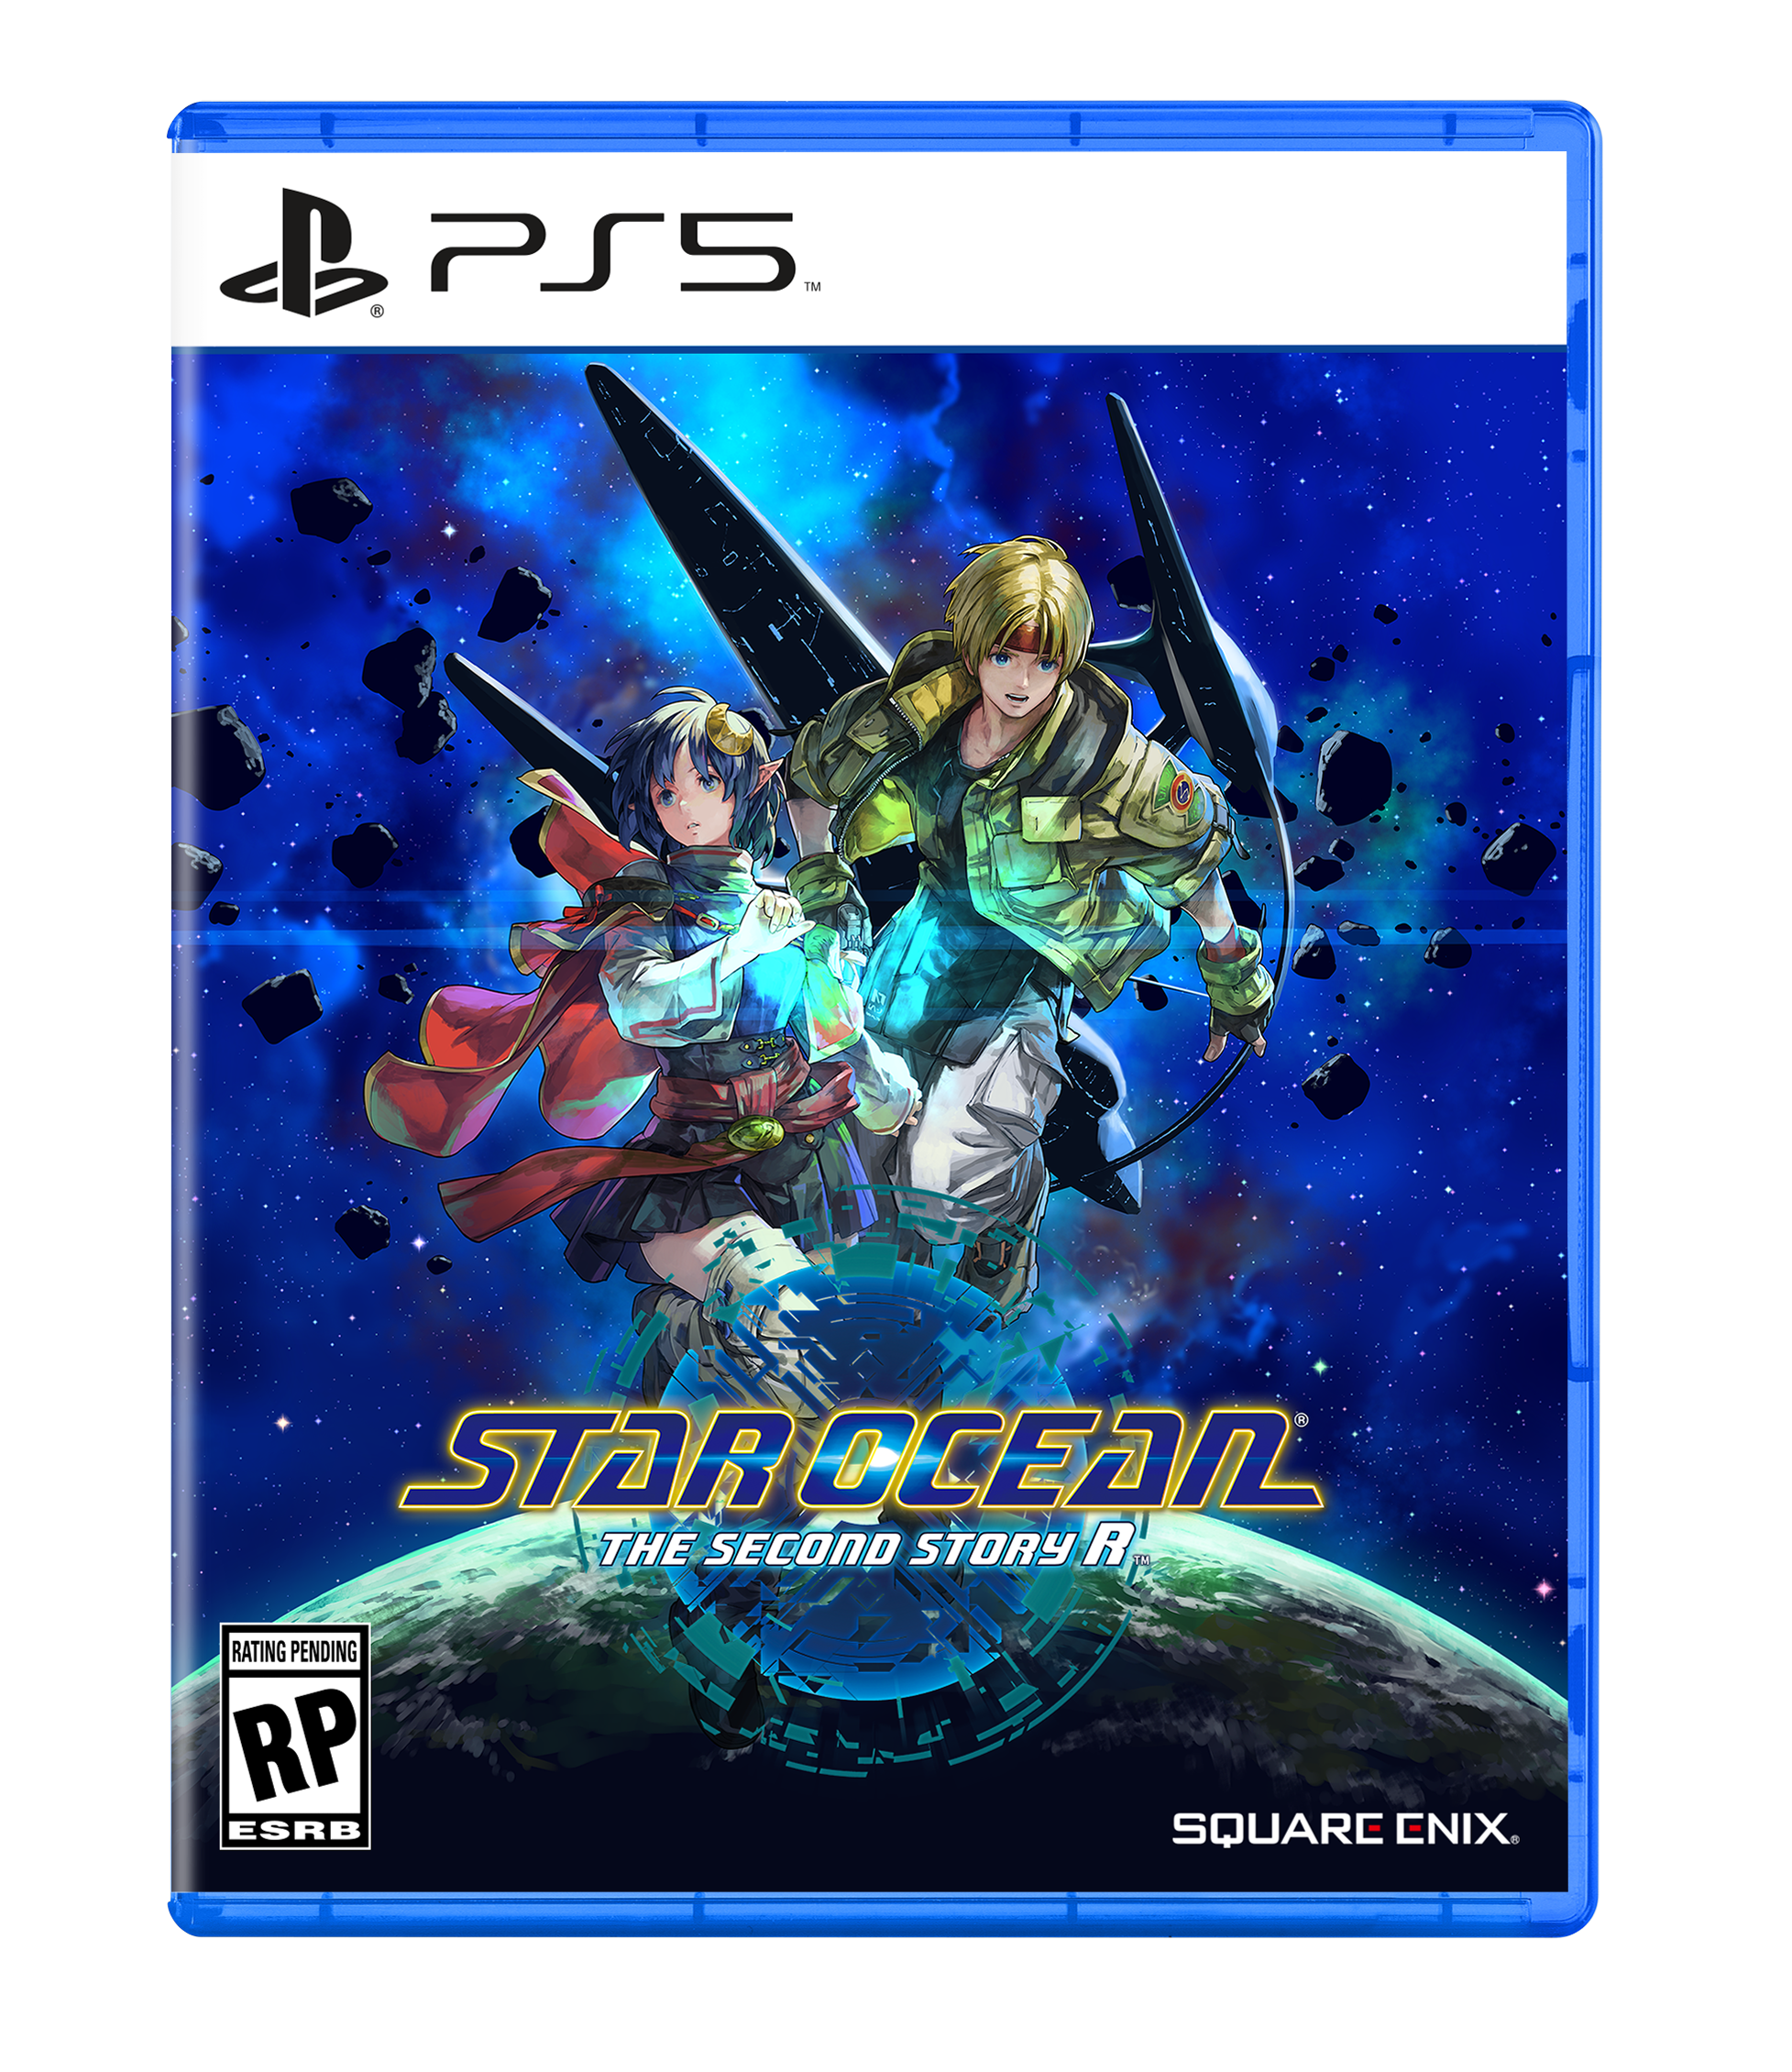 STAR OCEAN THE SECOND STORY R - PS4 & PS5